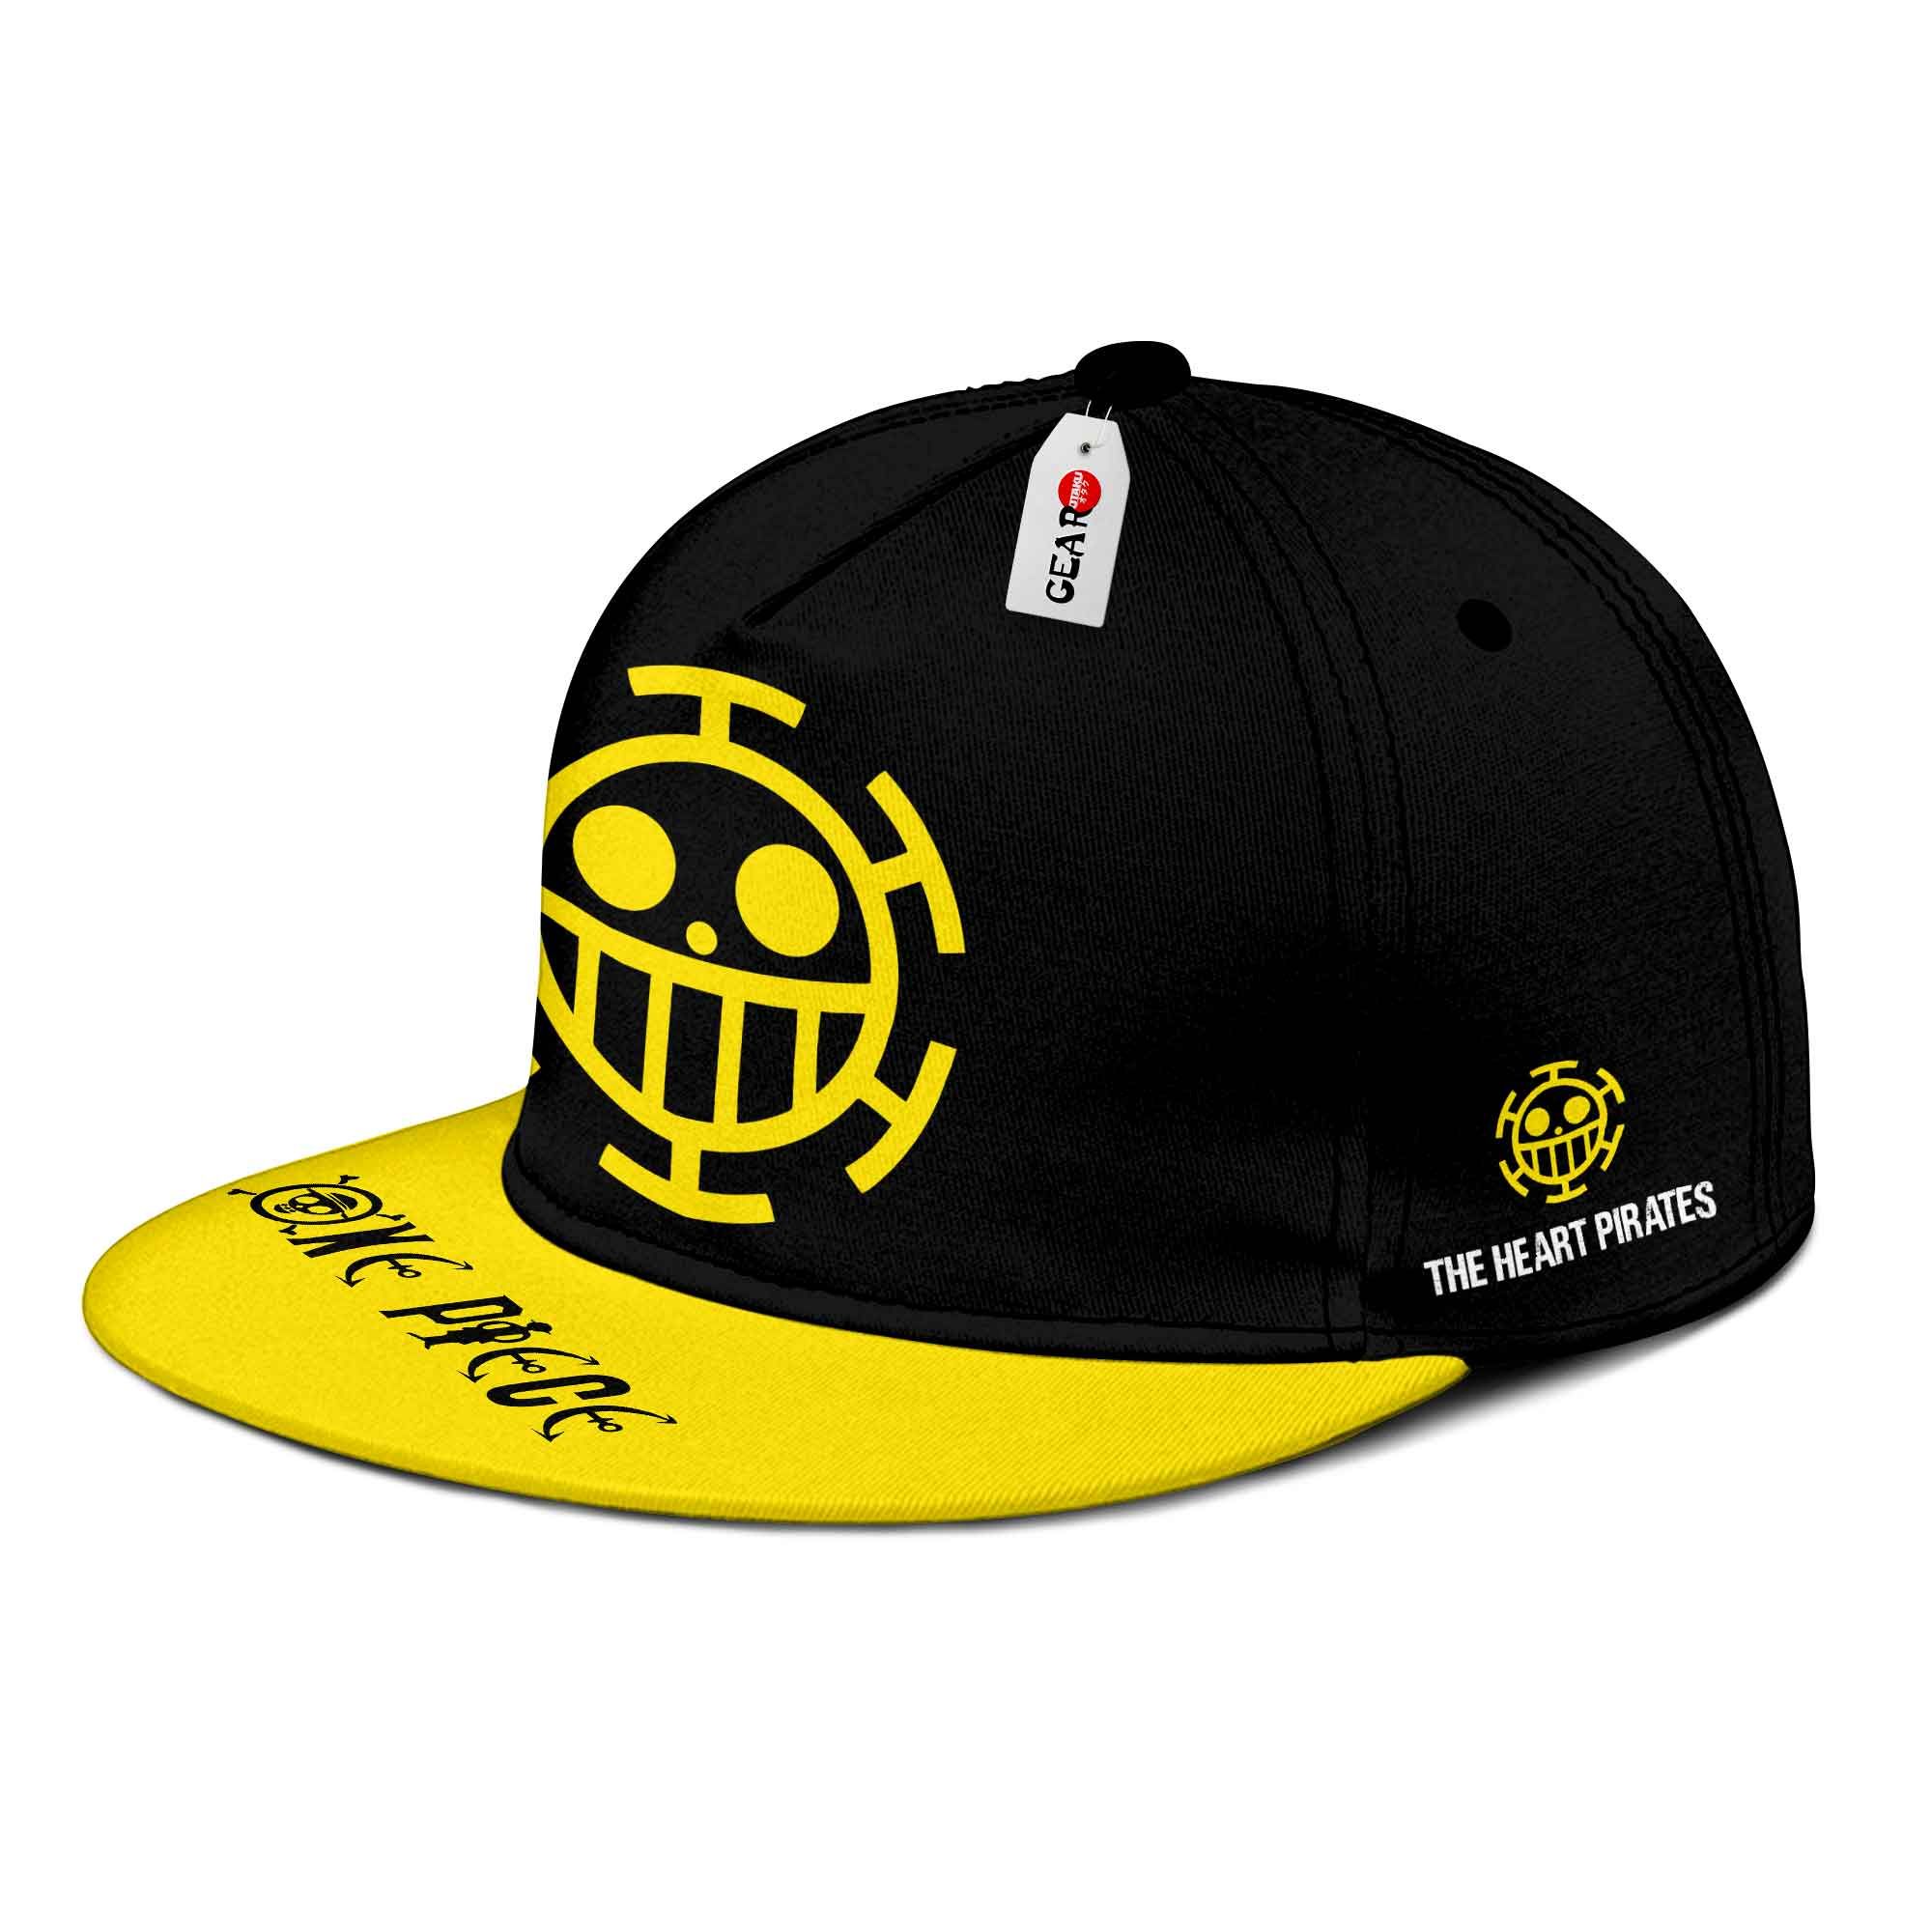 NEW Heart Pirates One Piece Cap hat2